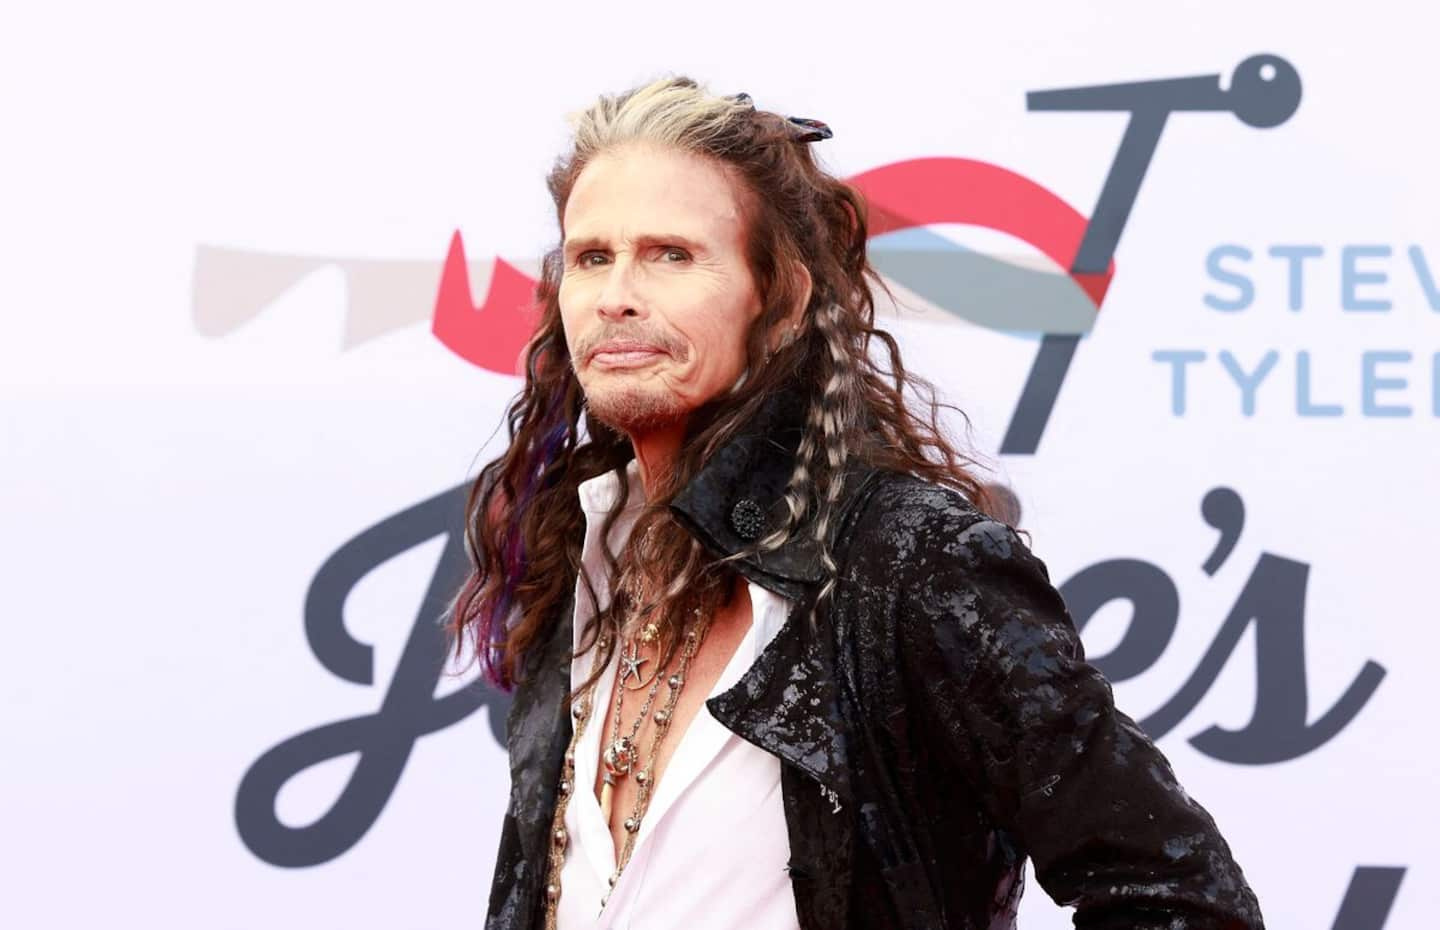 Aerosmith singer Steven Tyler charged with sexually assaulting a minor